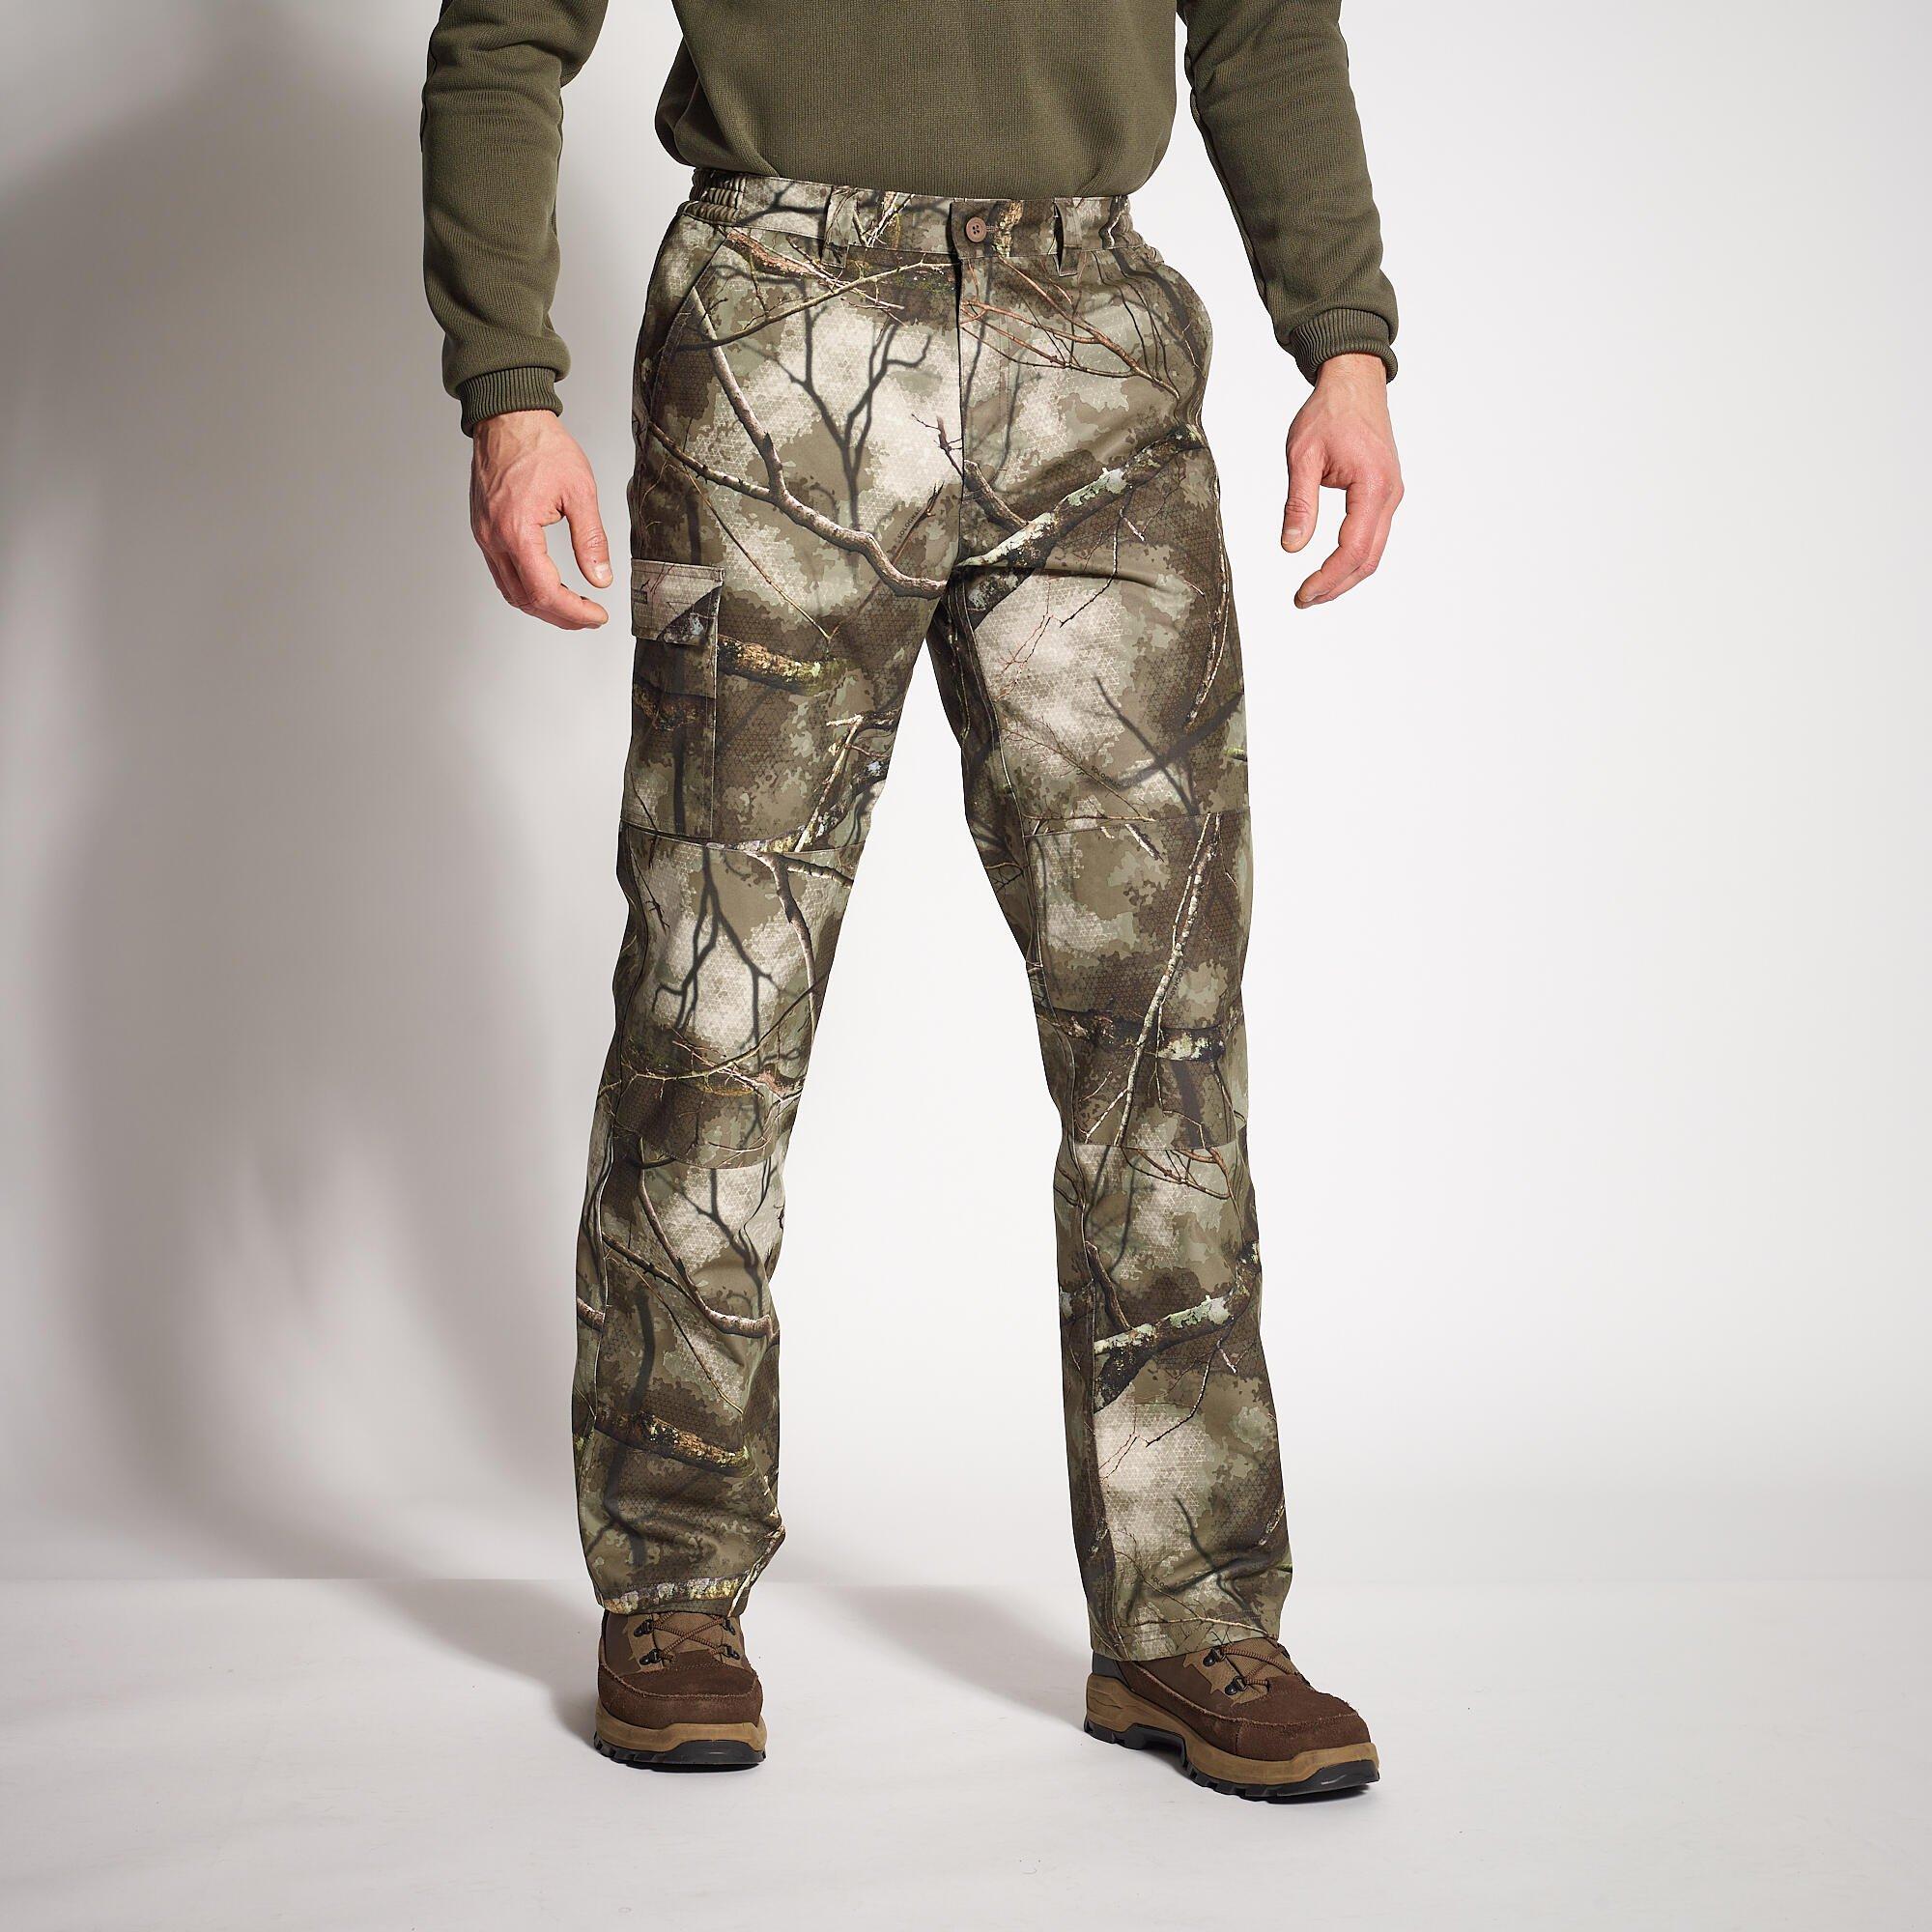 Solognac mens Trousers | 💪#Tough or the Toughest 🔥🔥? 👖🧤Check out the  #Wildlife accessories from #Solognac #Decathlon. Visit 💻  https://bit.ly/2x0yE7l to buy 🛒 #facebook... | By Decathlon Sports  IndiaFacebook